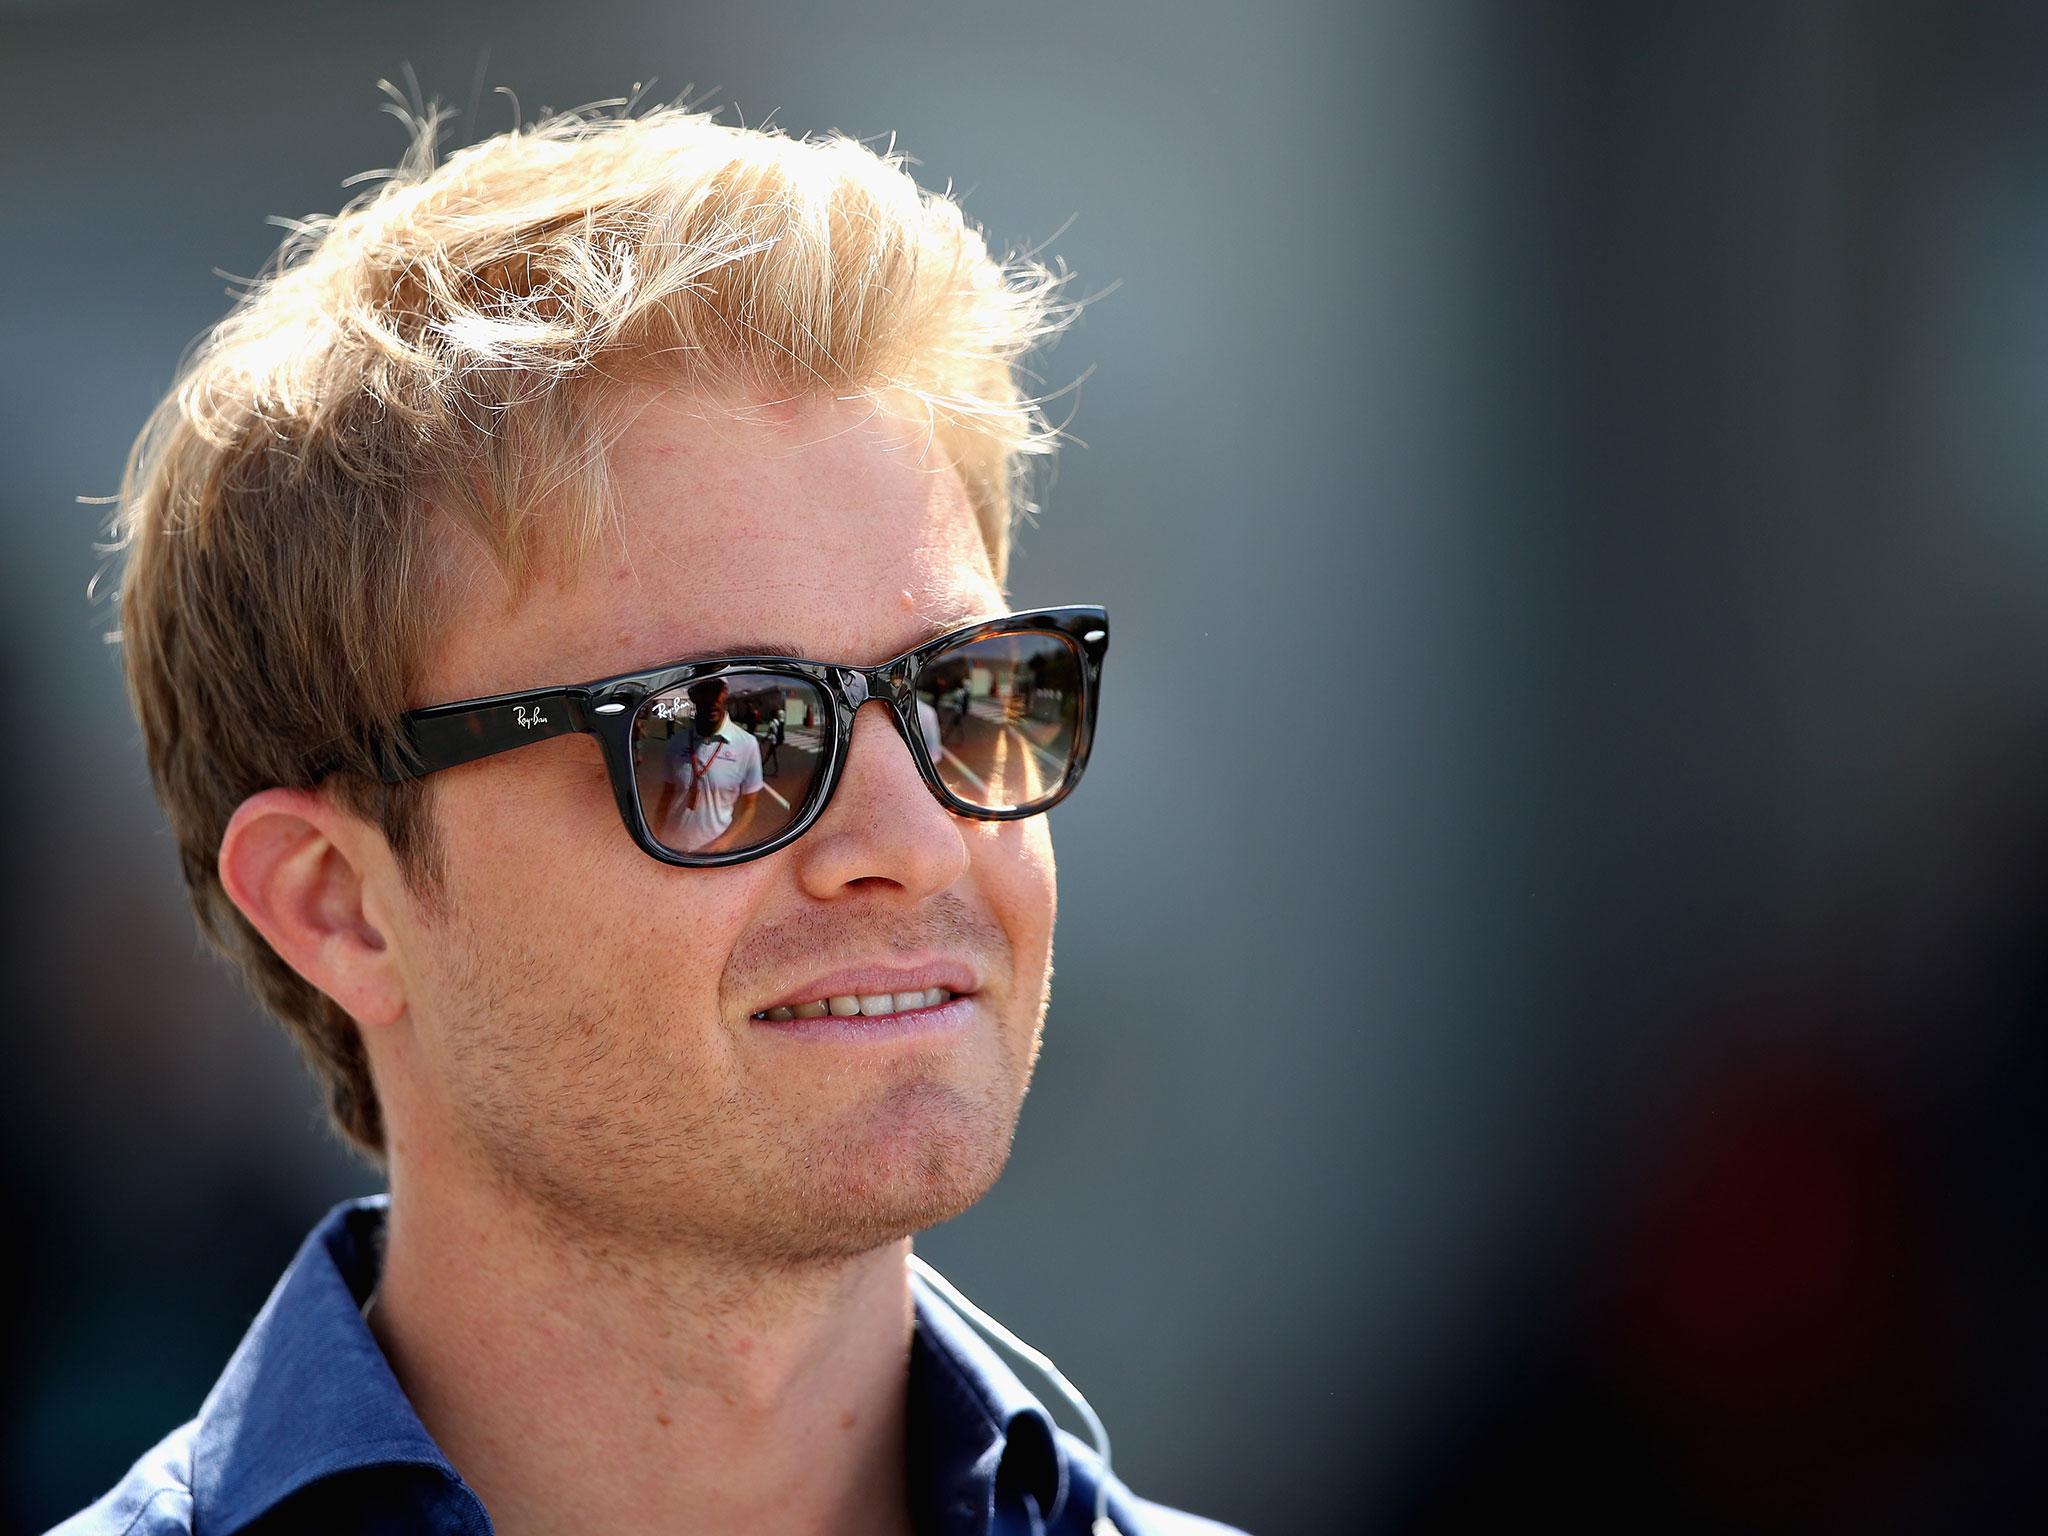 Nico Rosberg has left F1 behind, but what is next for the 32-year-old champ?